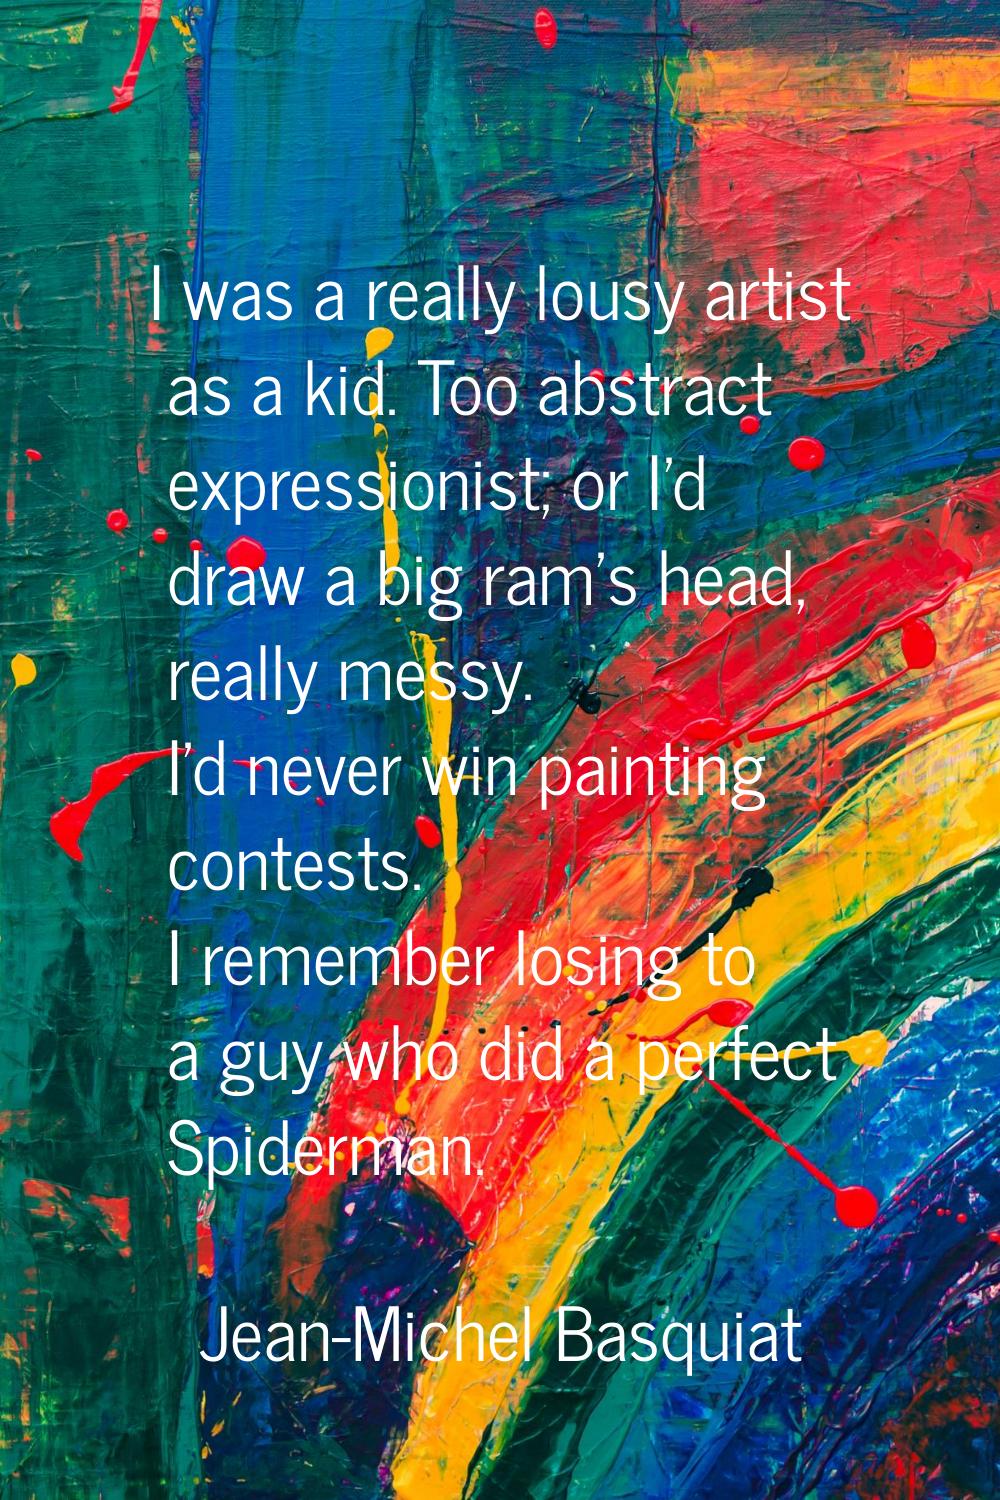 I was a really lousy artist as a kid. Too abstract expressionist; or I'd draw a big ram's head, rea